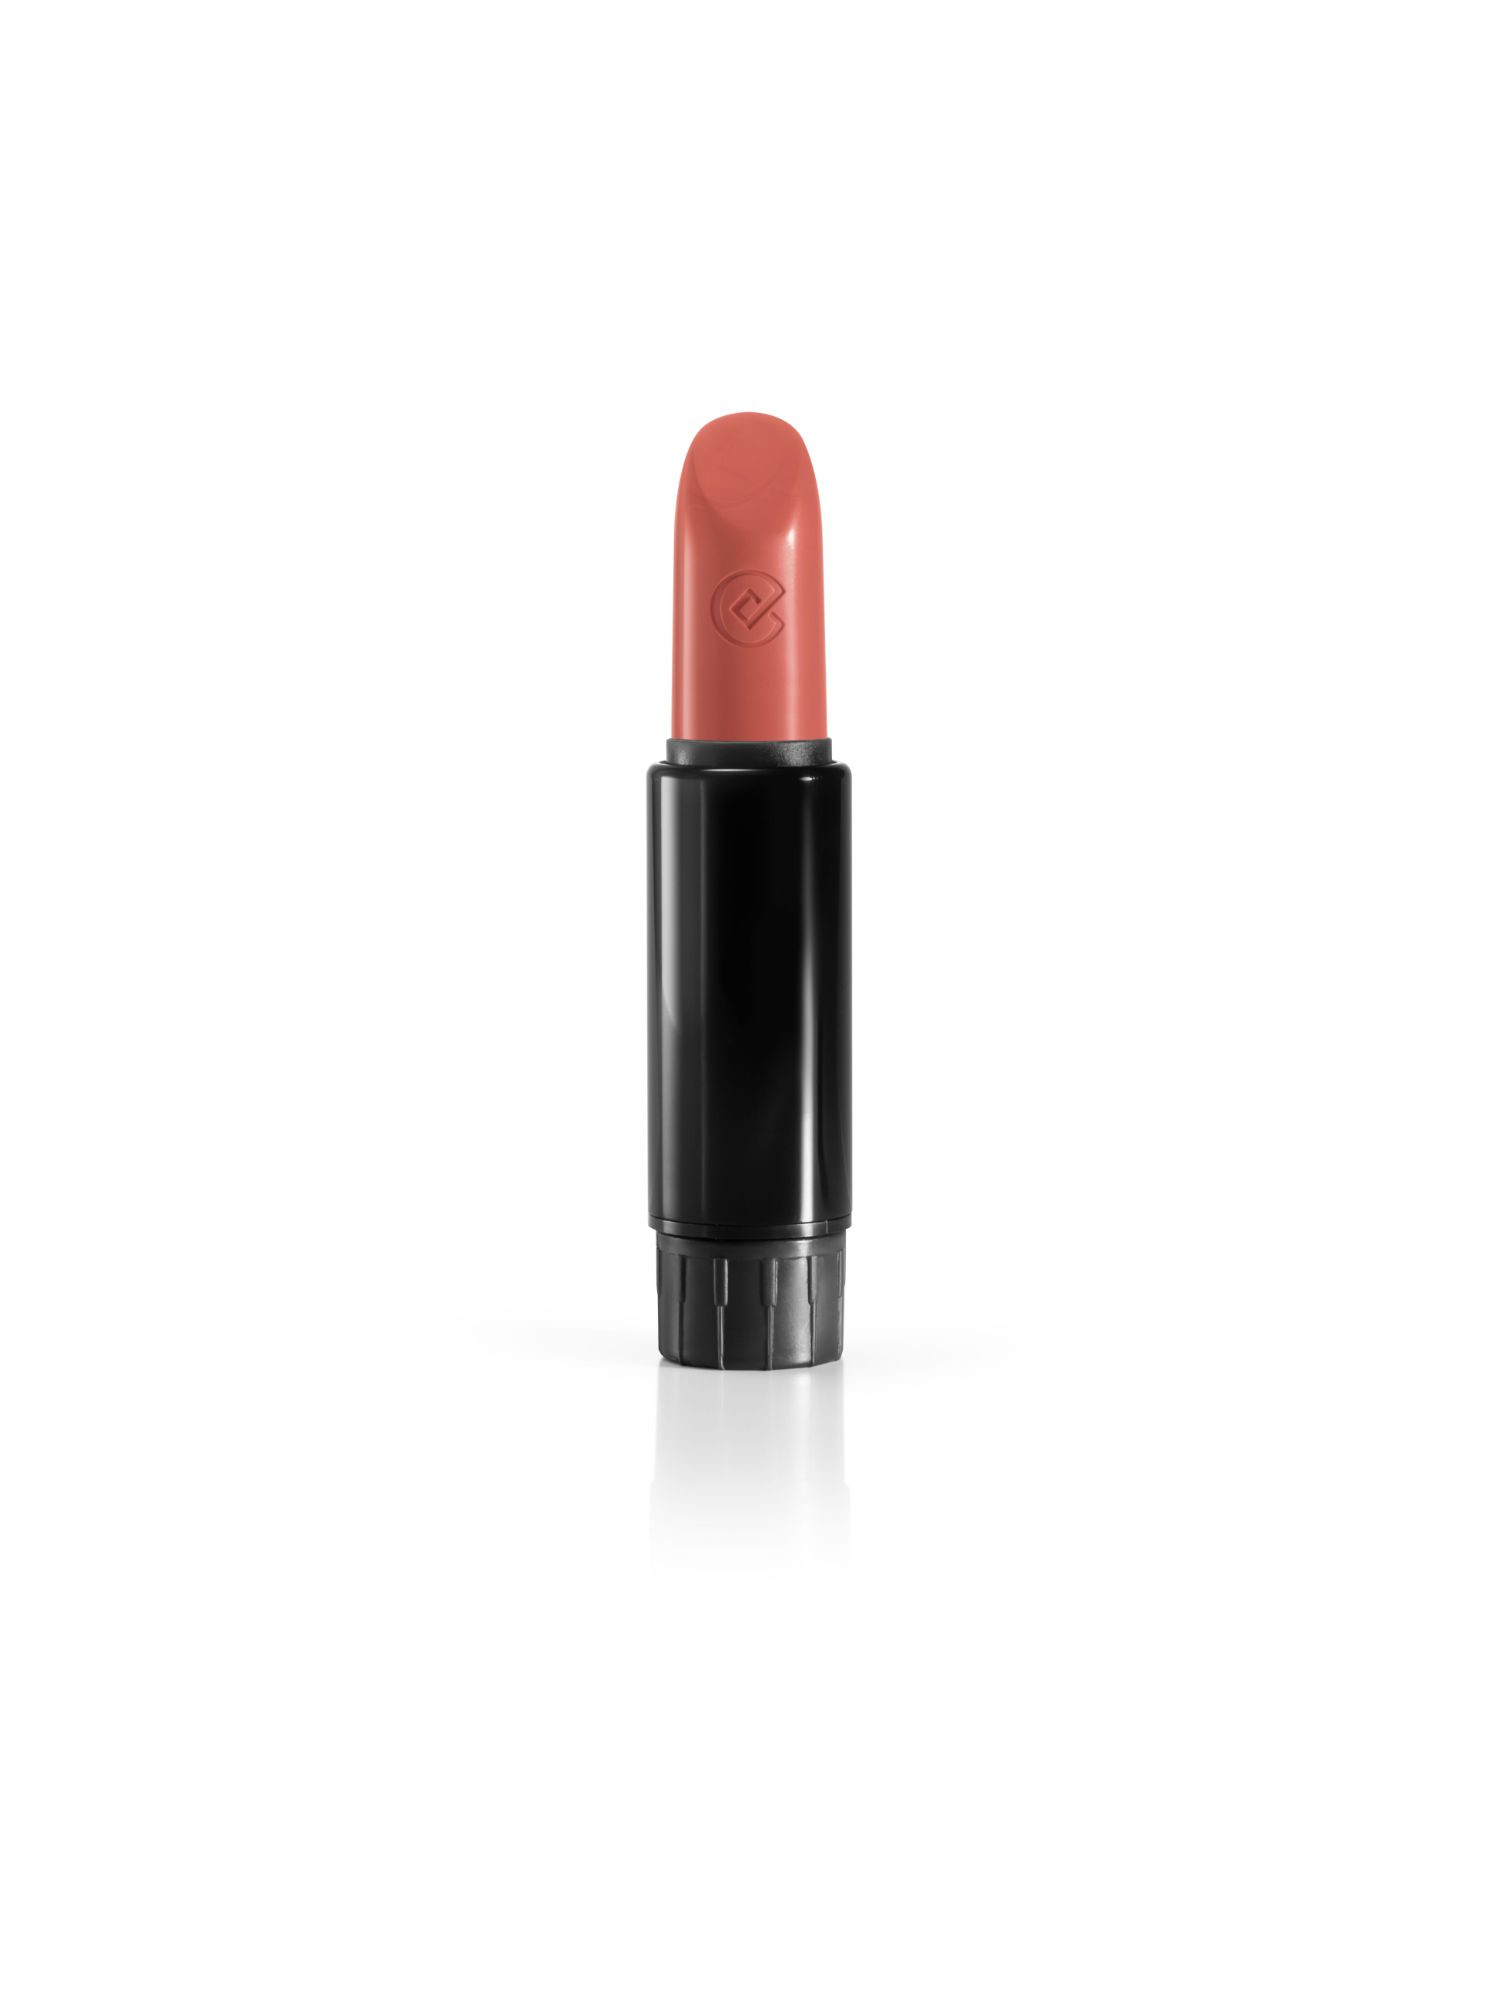 Pure lipstick refill - 21 Rosa selvatica, Dark Pink, large image number 0